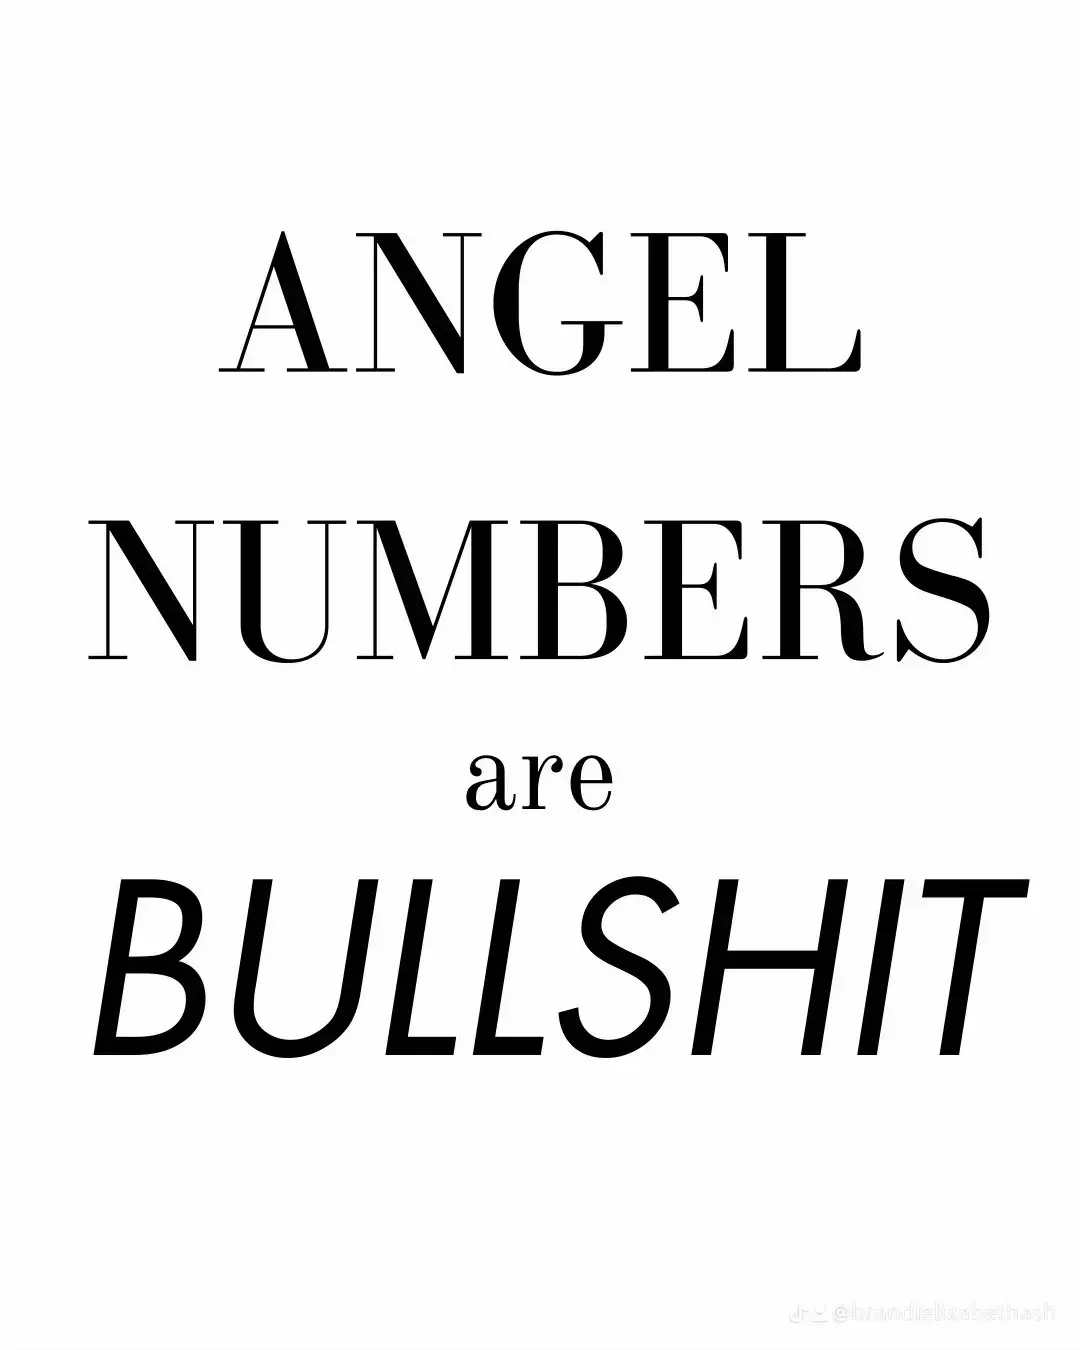  A white background with black text that says "angel numbers are bullshit."